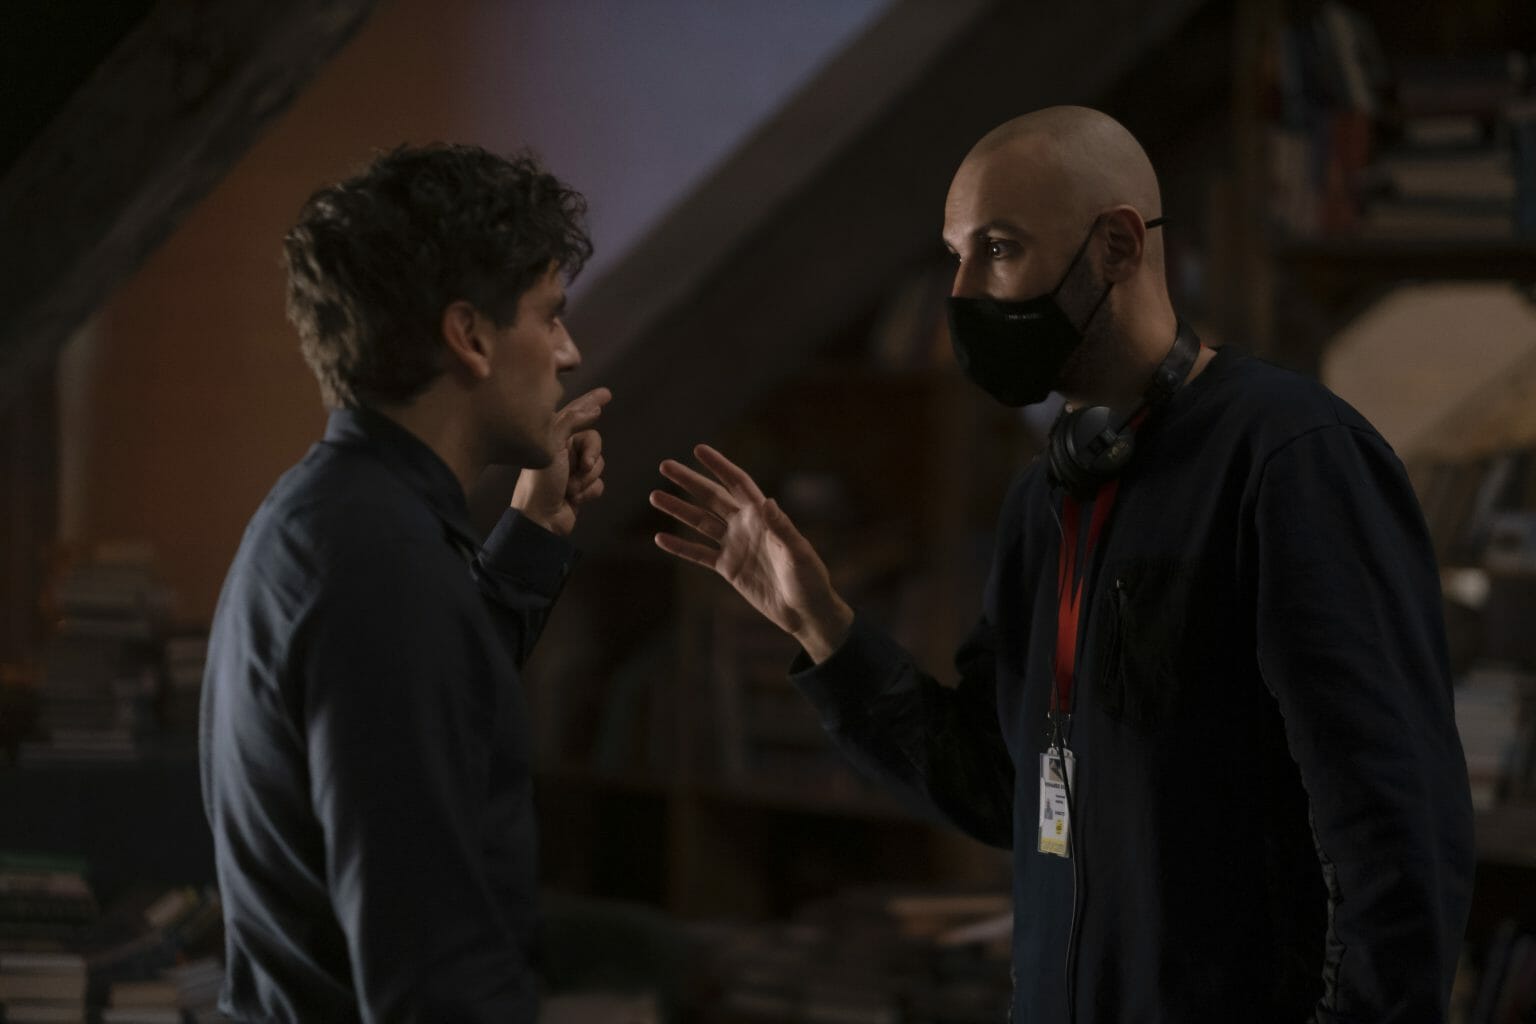 Director Mohamed Diab walks Oscar Isaac in costume as Steven Grant through a scene on the set of the MCU Disney+ series MOON KNIGHT.